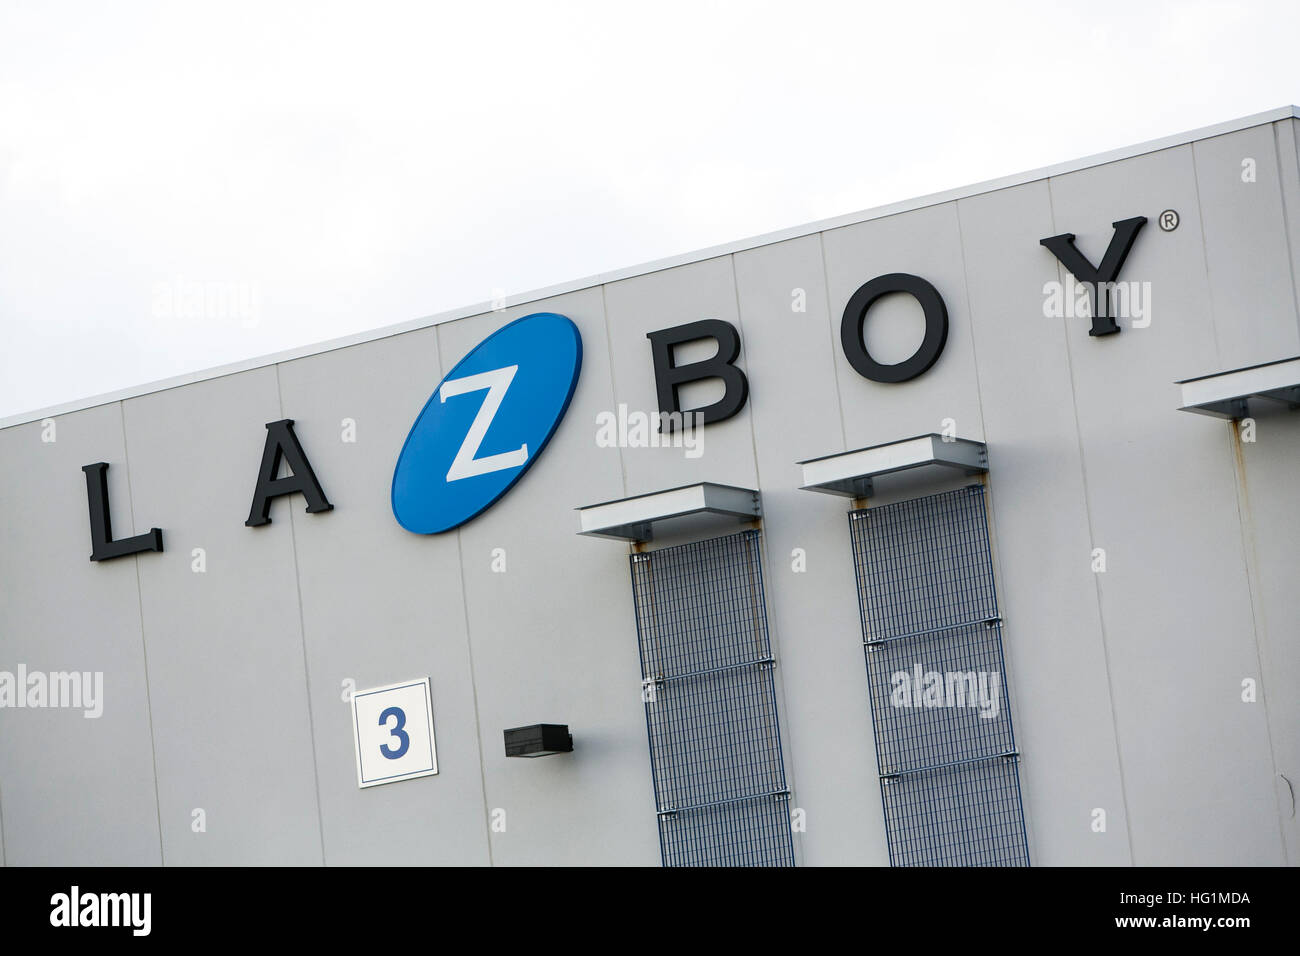 A logo sign outside of a facility occupied by La-Z-Boy, Inc., in Robbinsville, New Jersey on December 10, 2016. Stock Photo